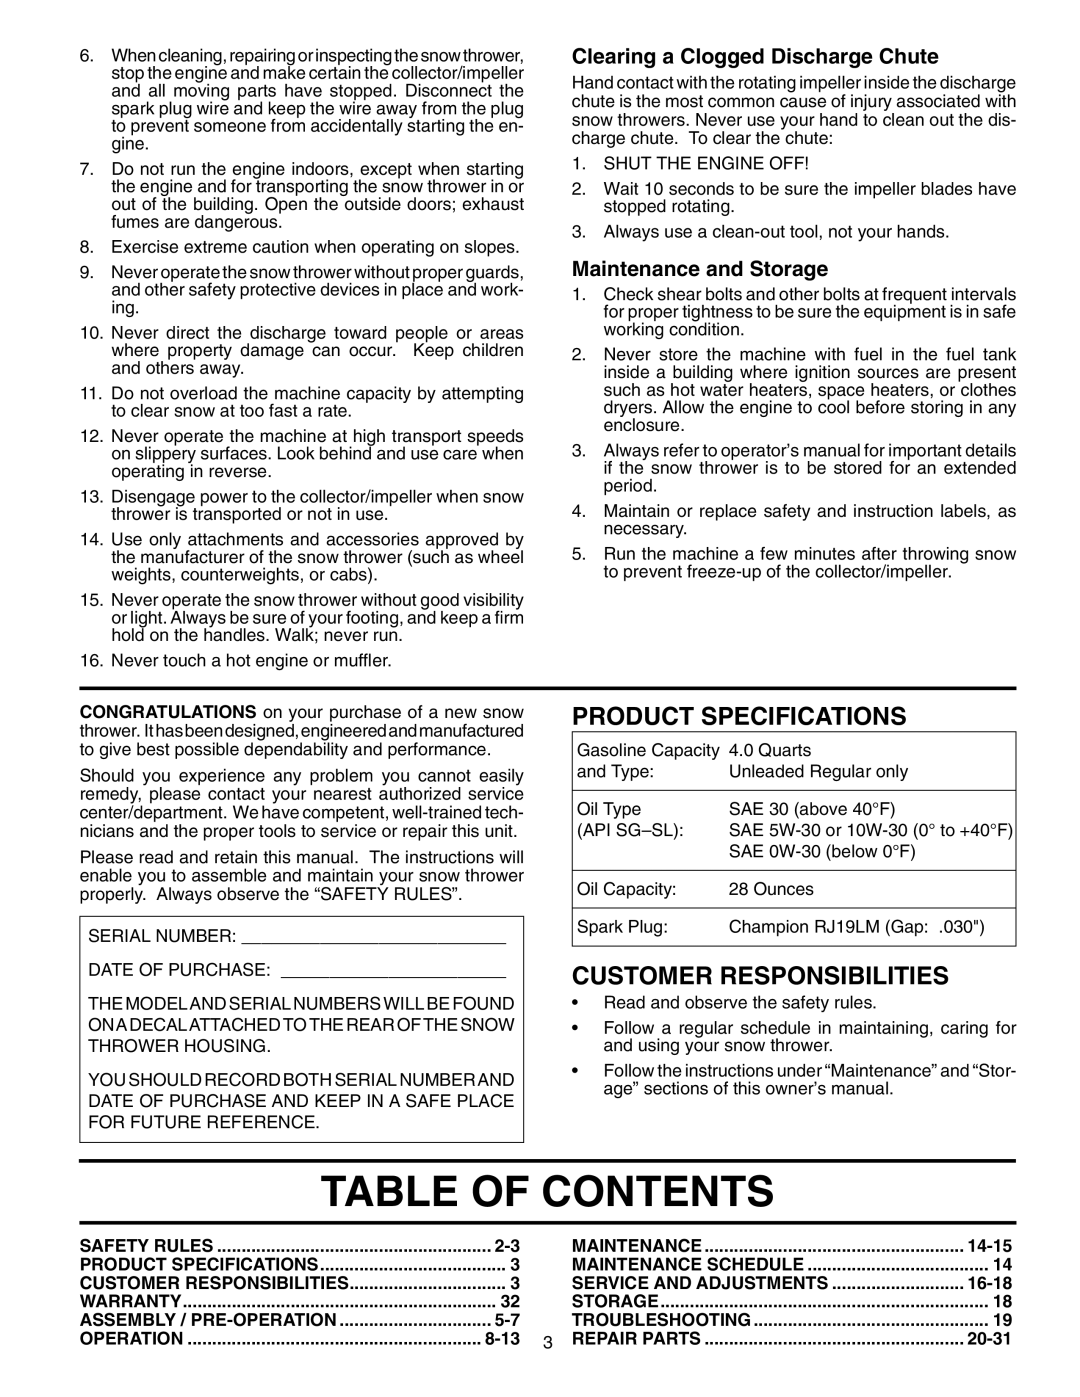 Husqvarna 10530SBE Table Of Contents, Product Specifications, Customer Responsibilities, Maintenance and Storage, 8-13 